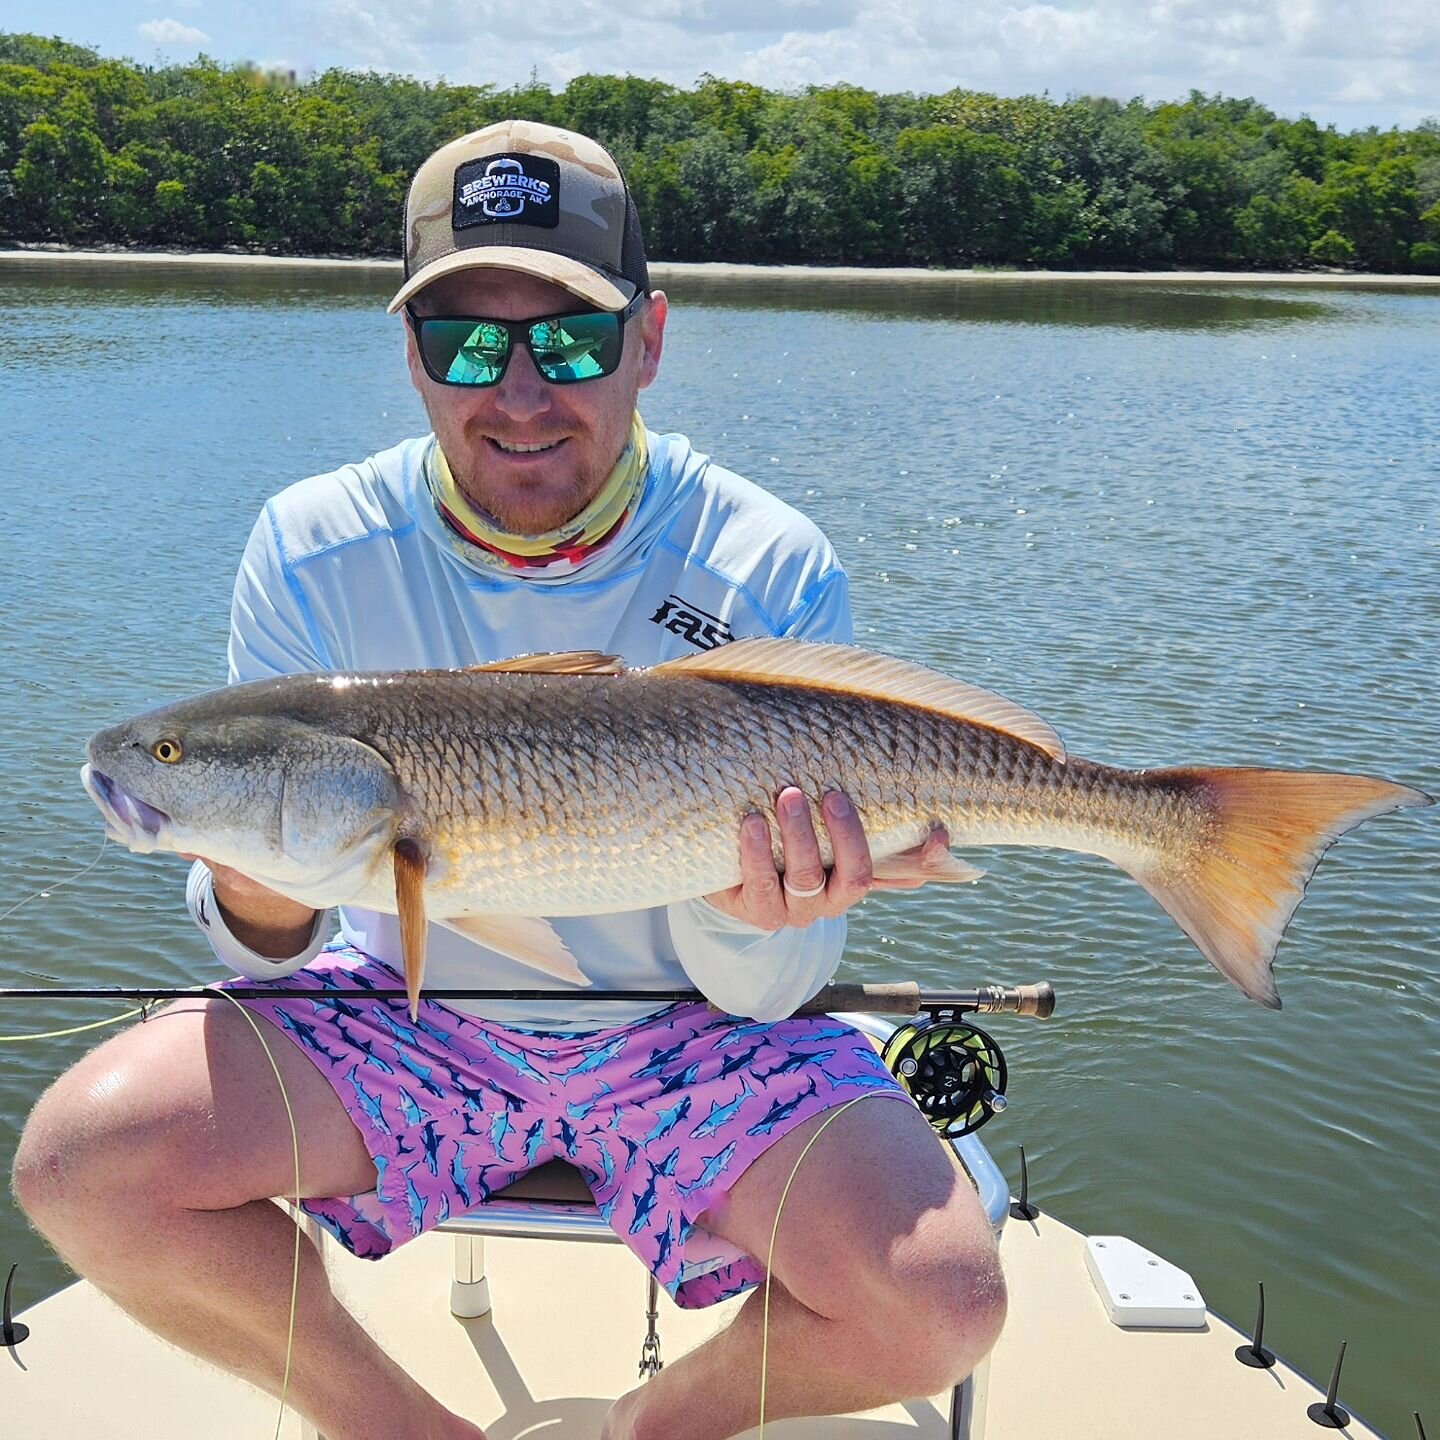 Ryan with a #redfishonfly from today.